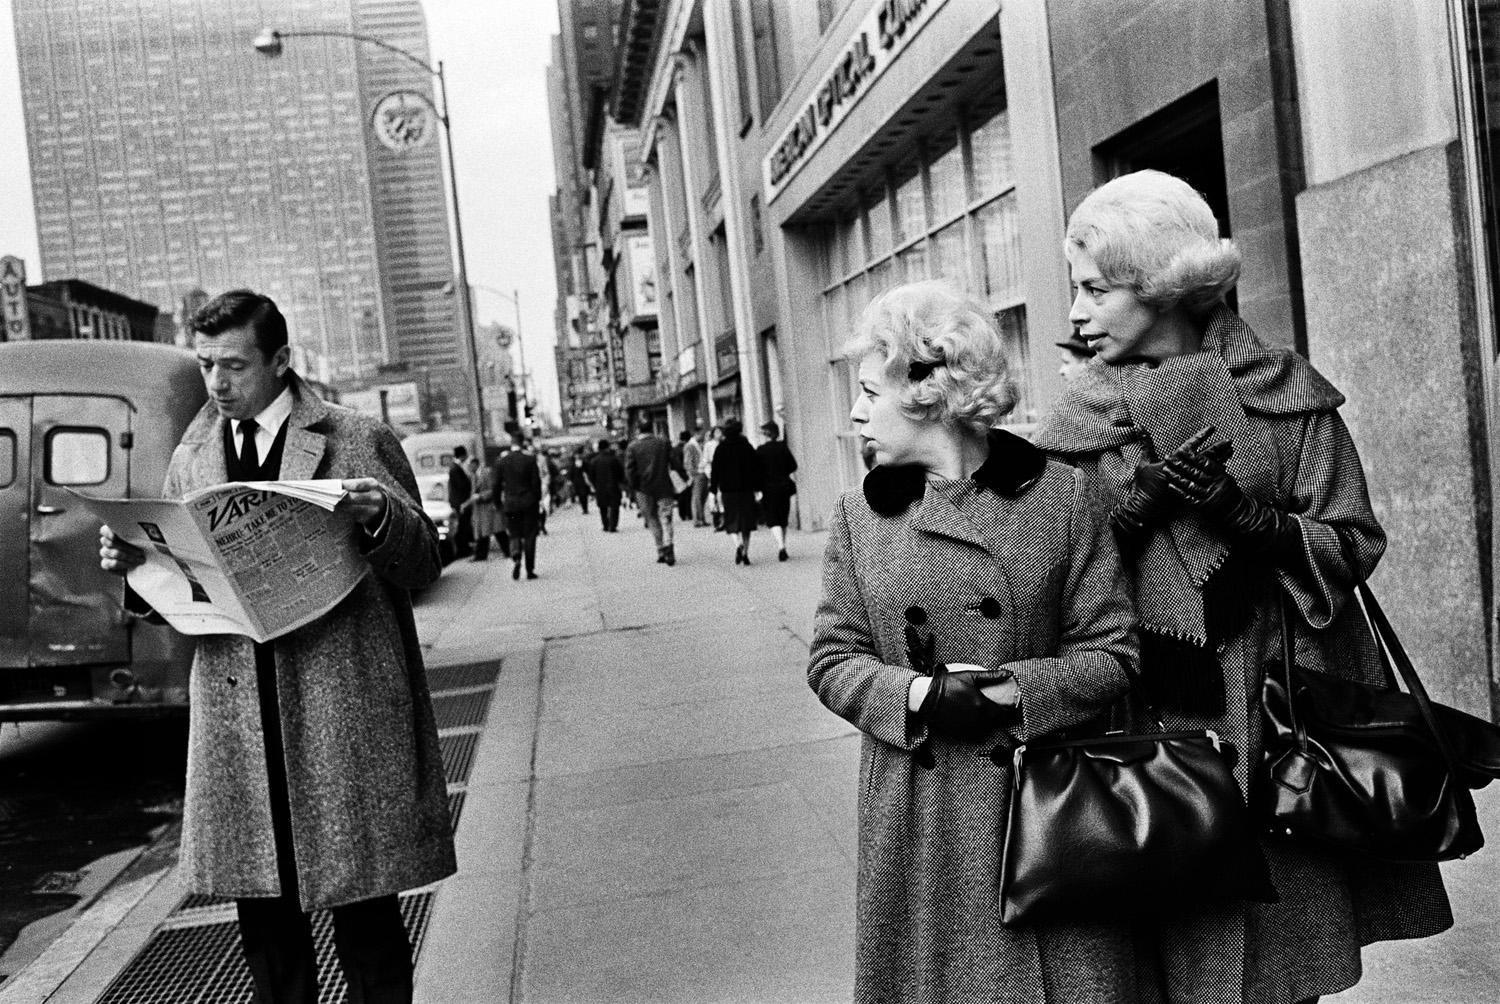 Image: Yves Montand, Fifth Avenue, New York 1961